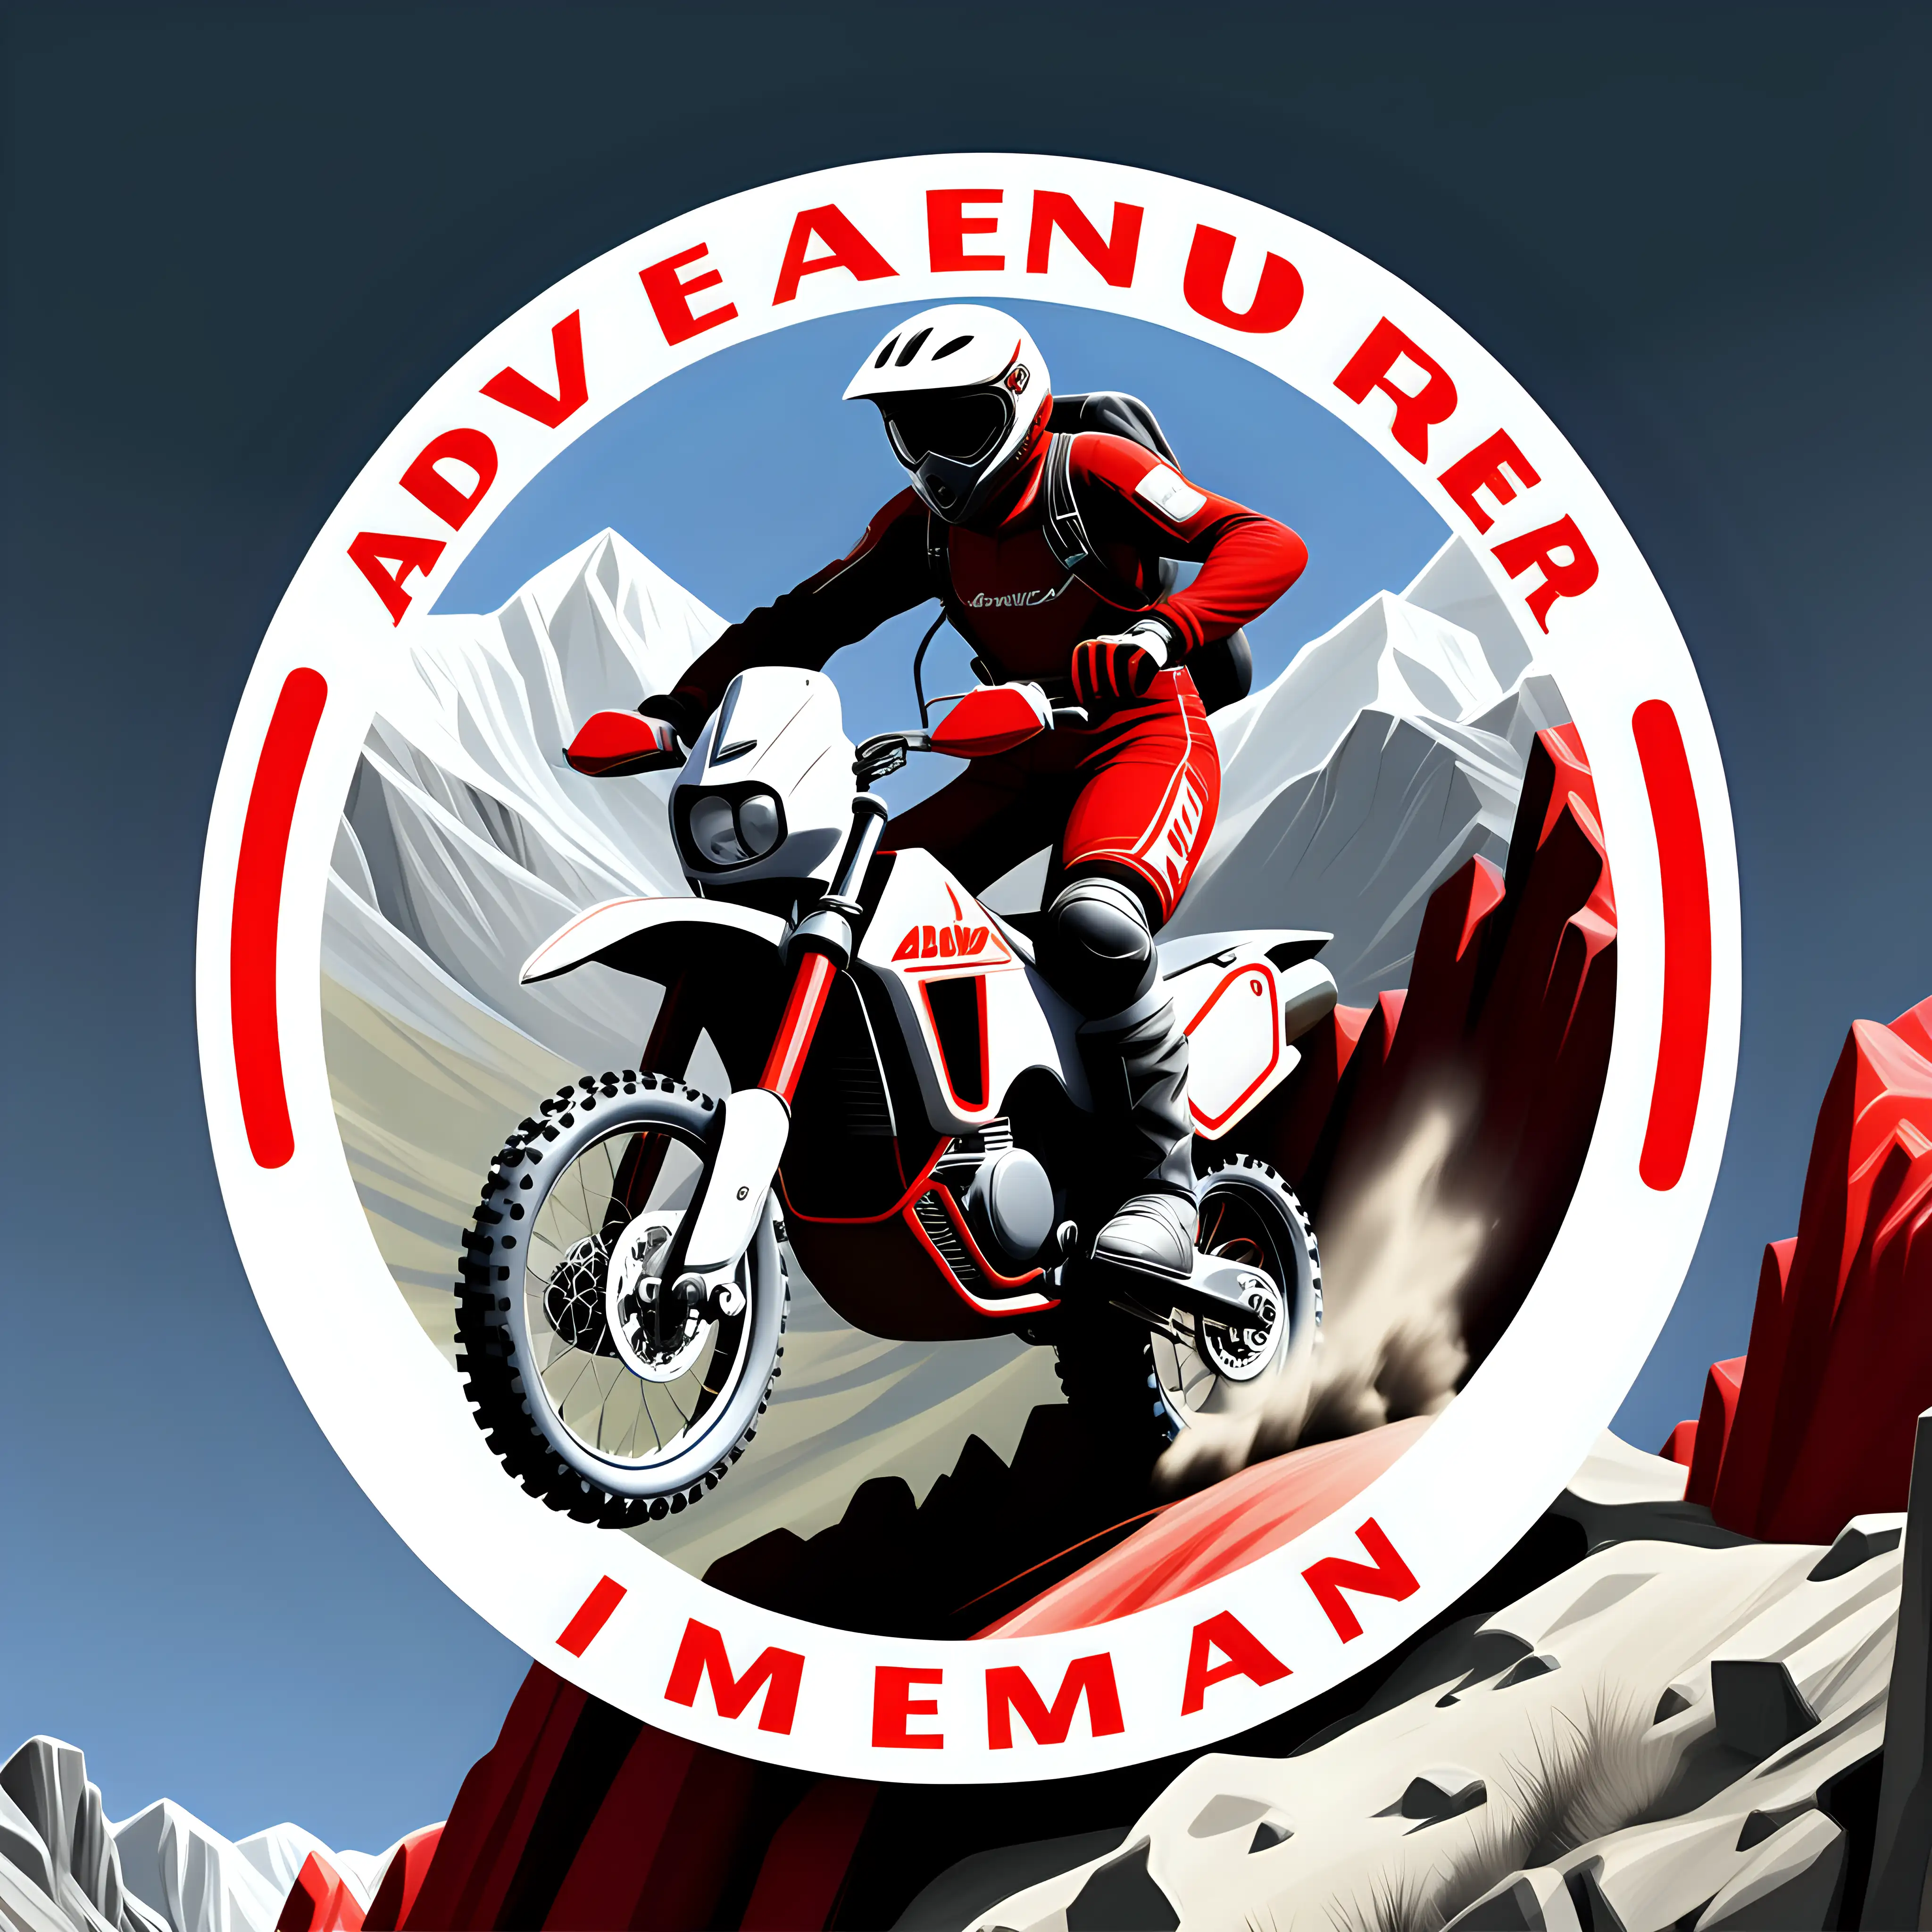 A round logo with the word ADVENDURO in it, that shows a rally motorbike and a rider climbing a mountain. The motorbike should be red and white. I want he clothes of the rider to be mostly black or blue.